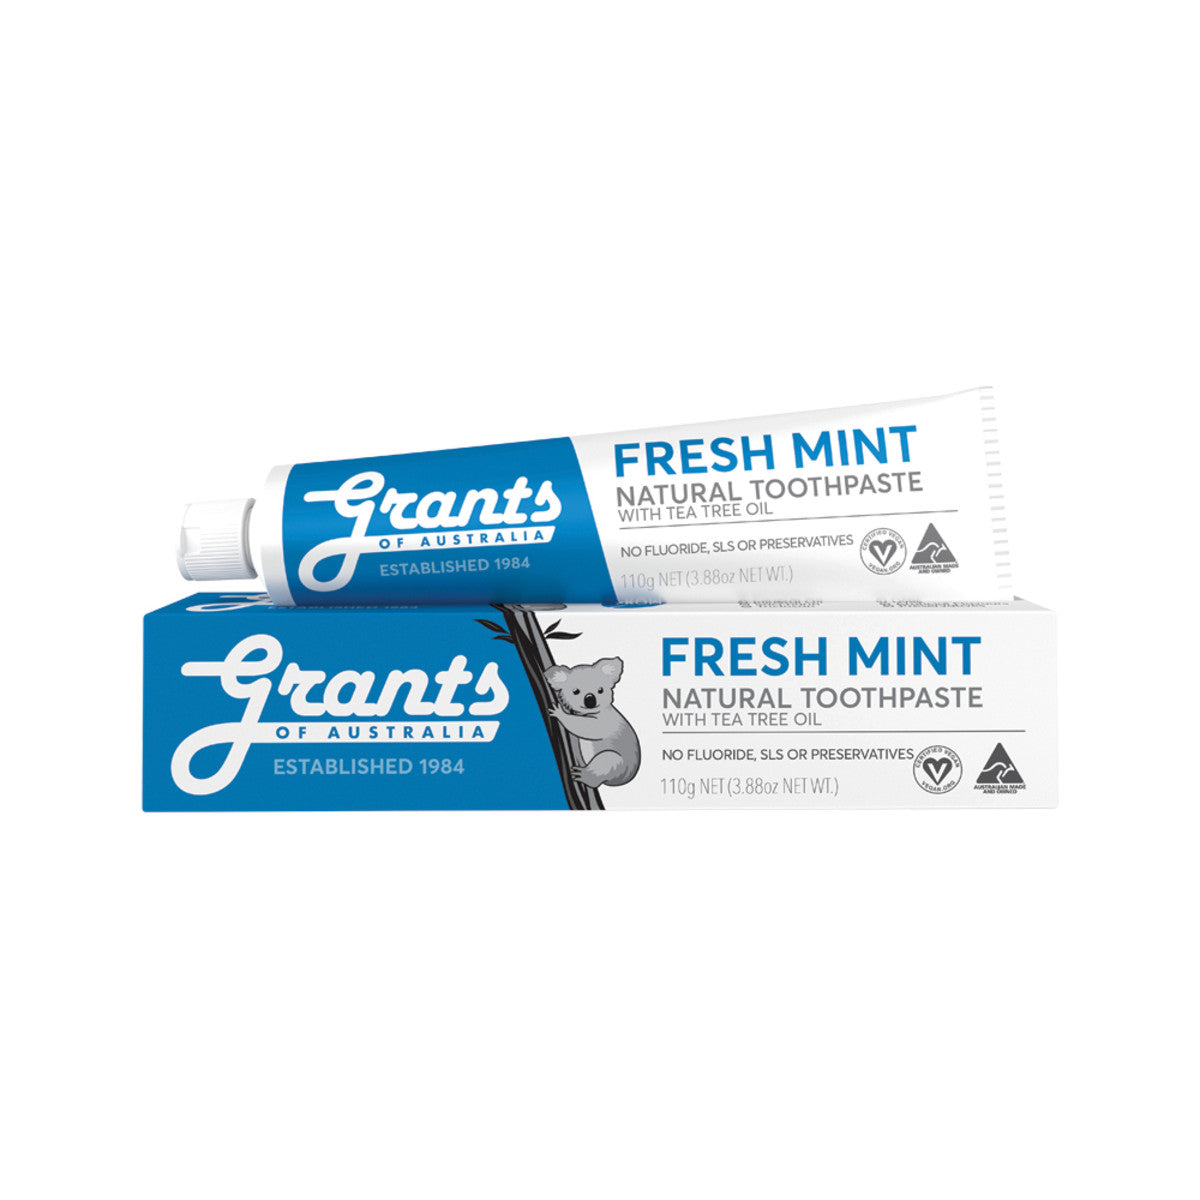 Grants - Natural Toothpaste (Fresh Mint with Tea Tree Oil, Fluoride Free)